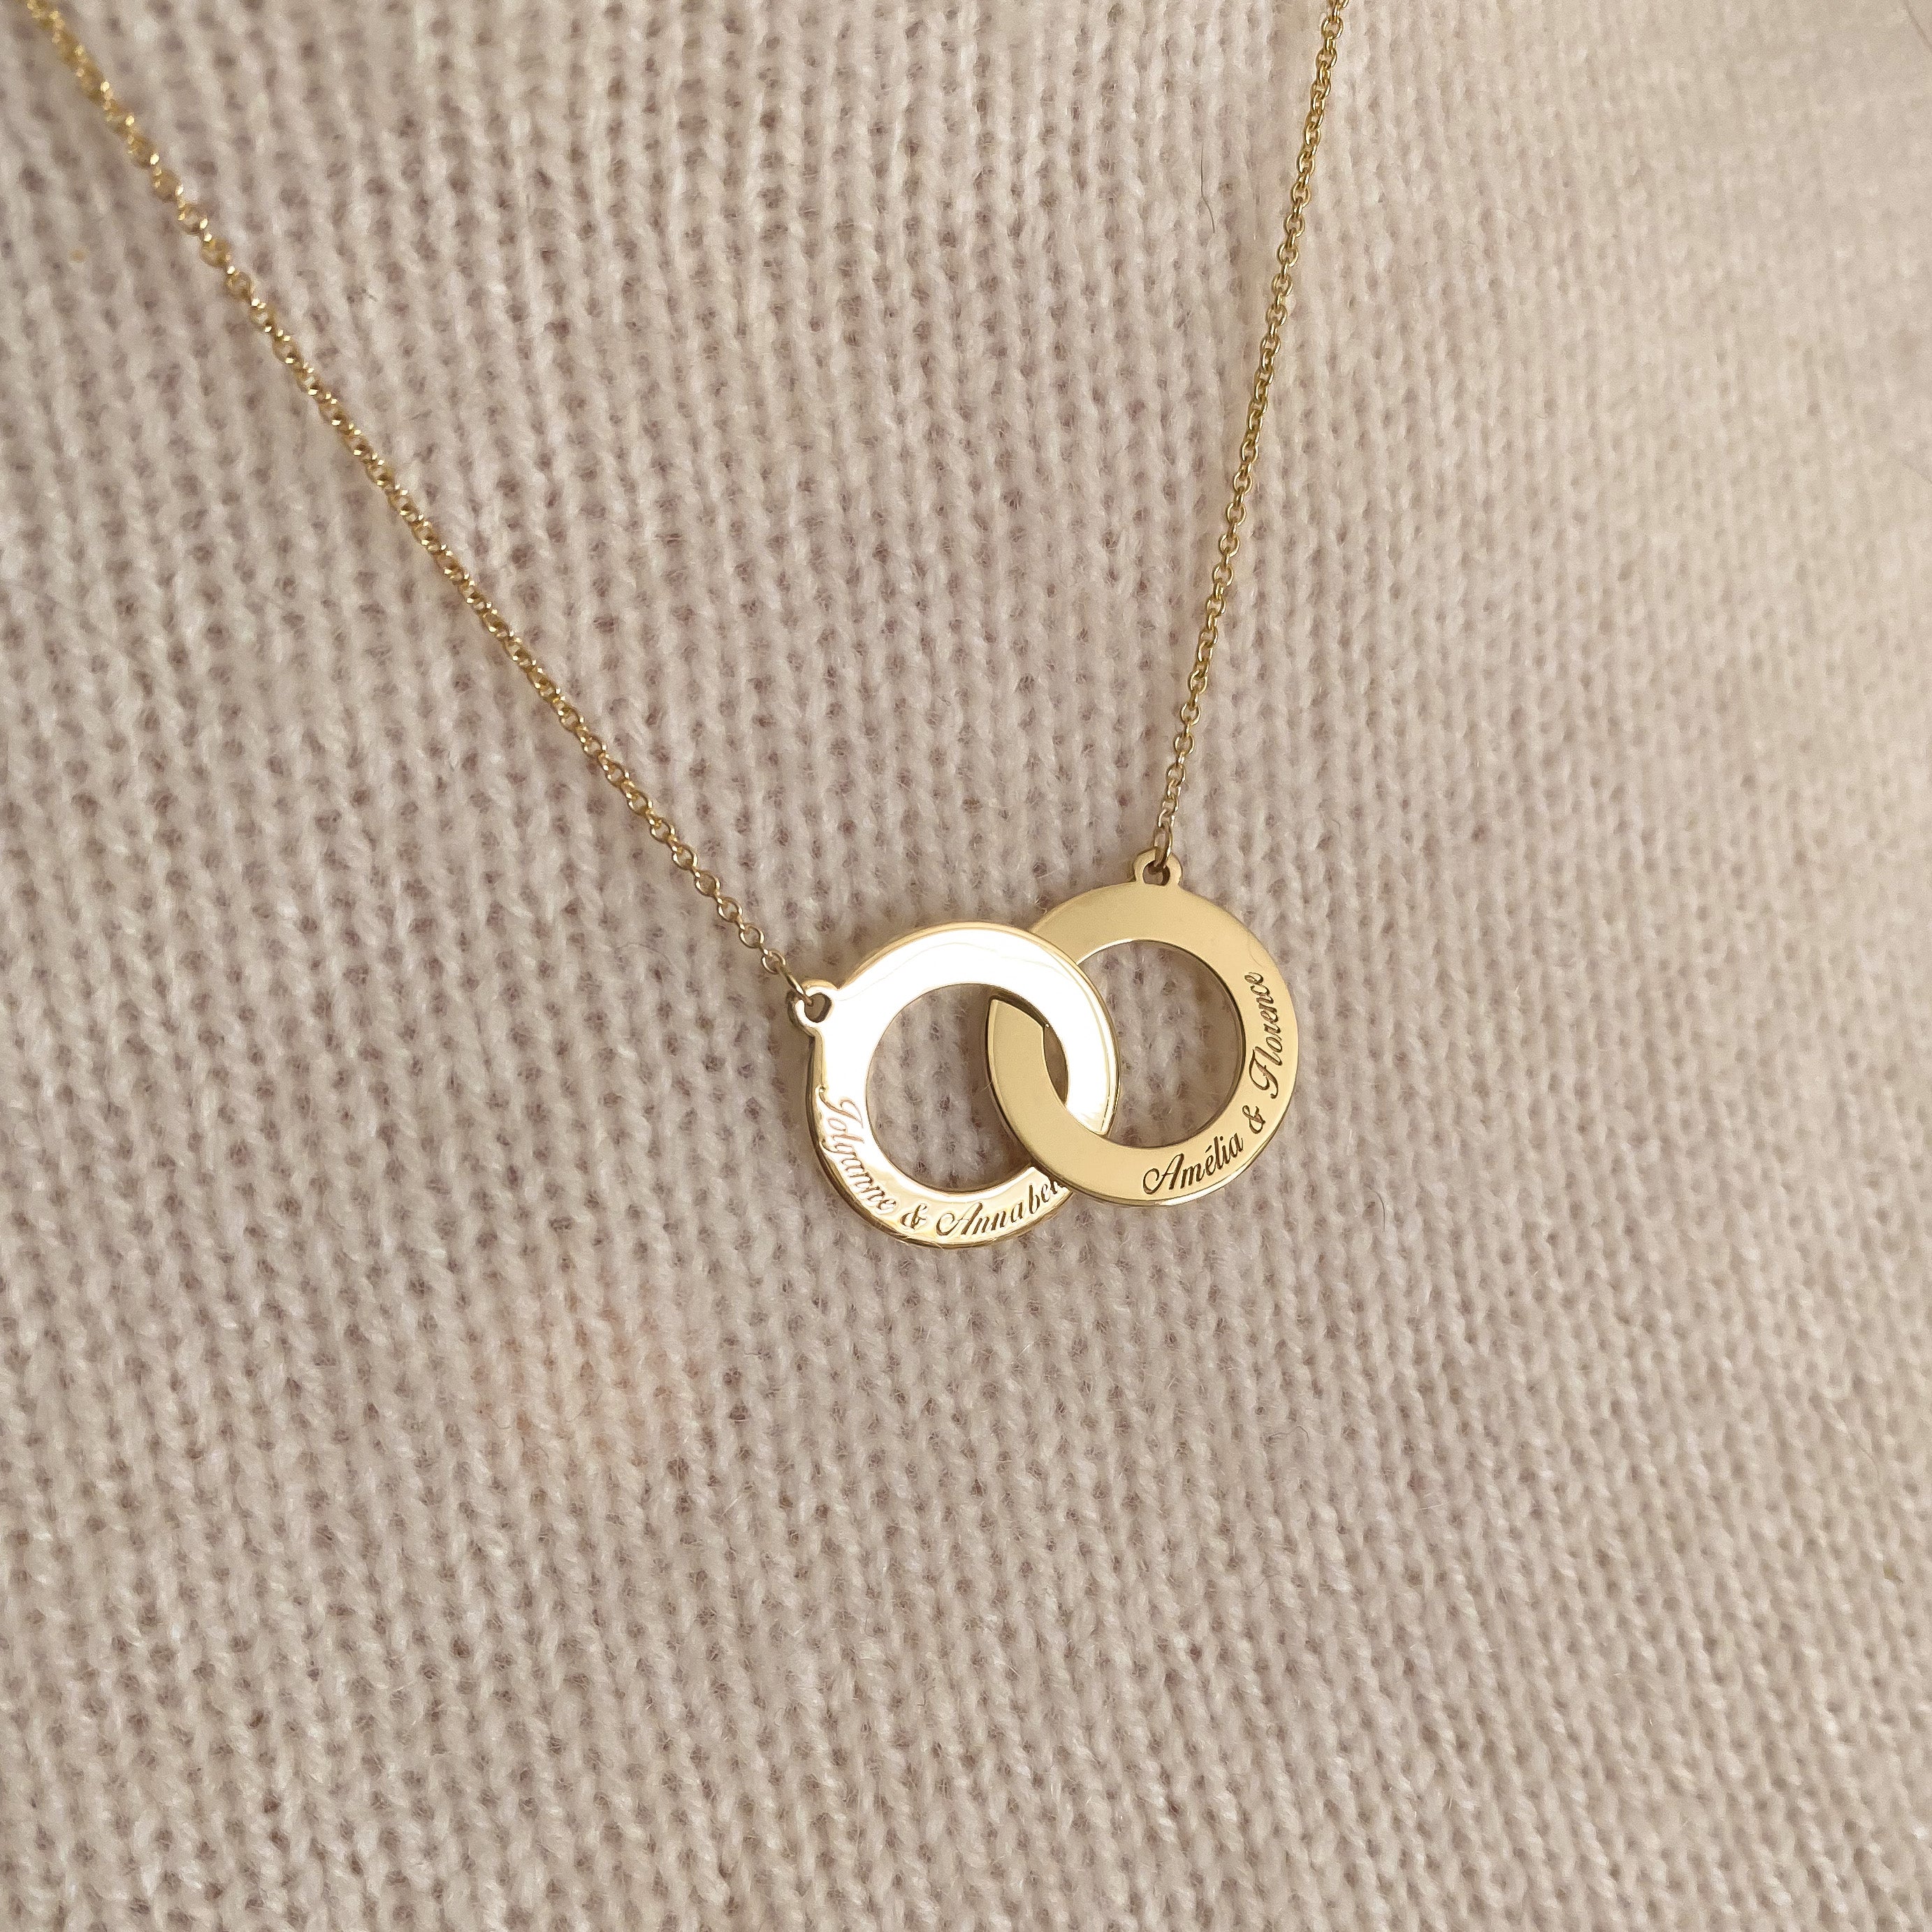 Complicity Necklace - 2 rings 16mm